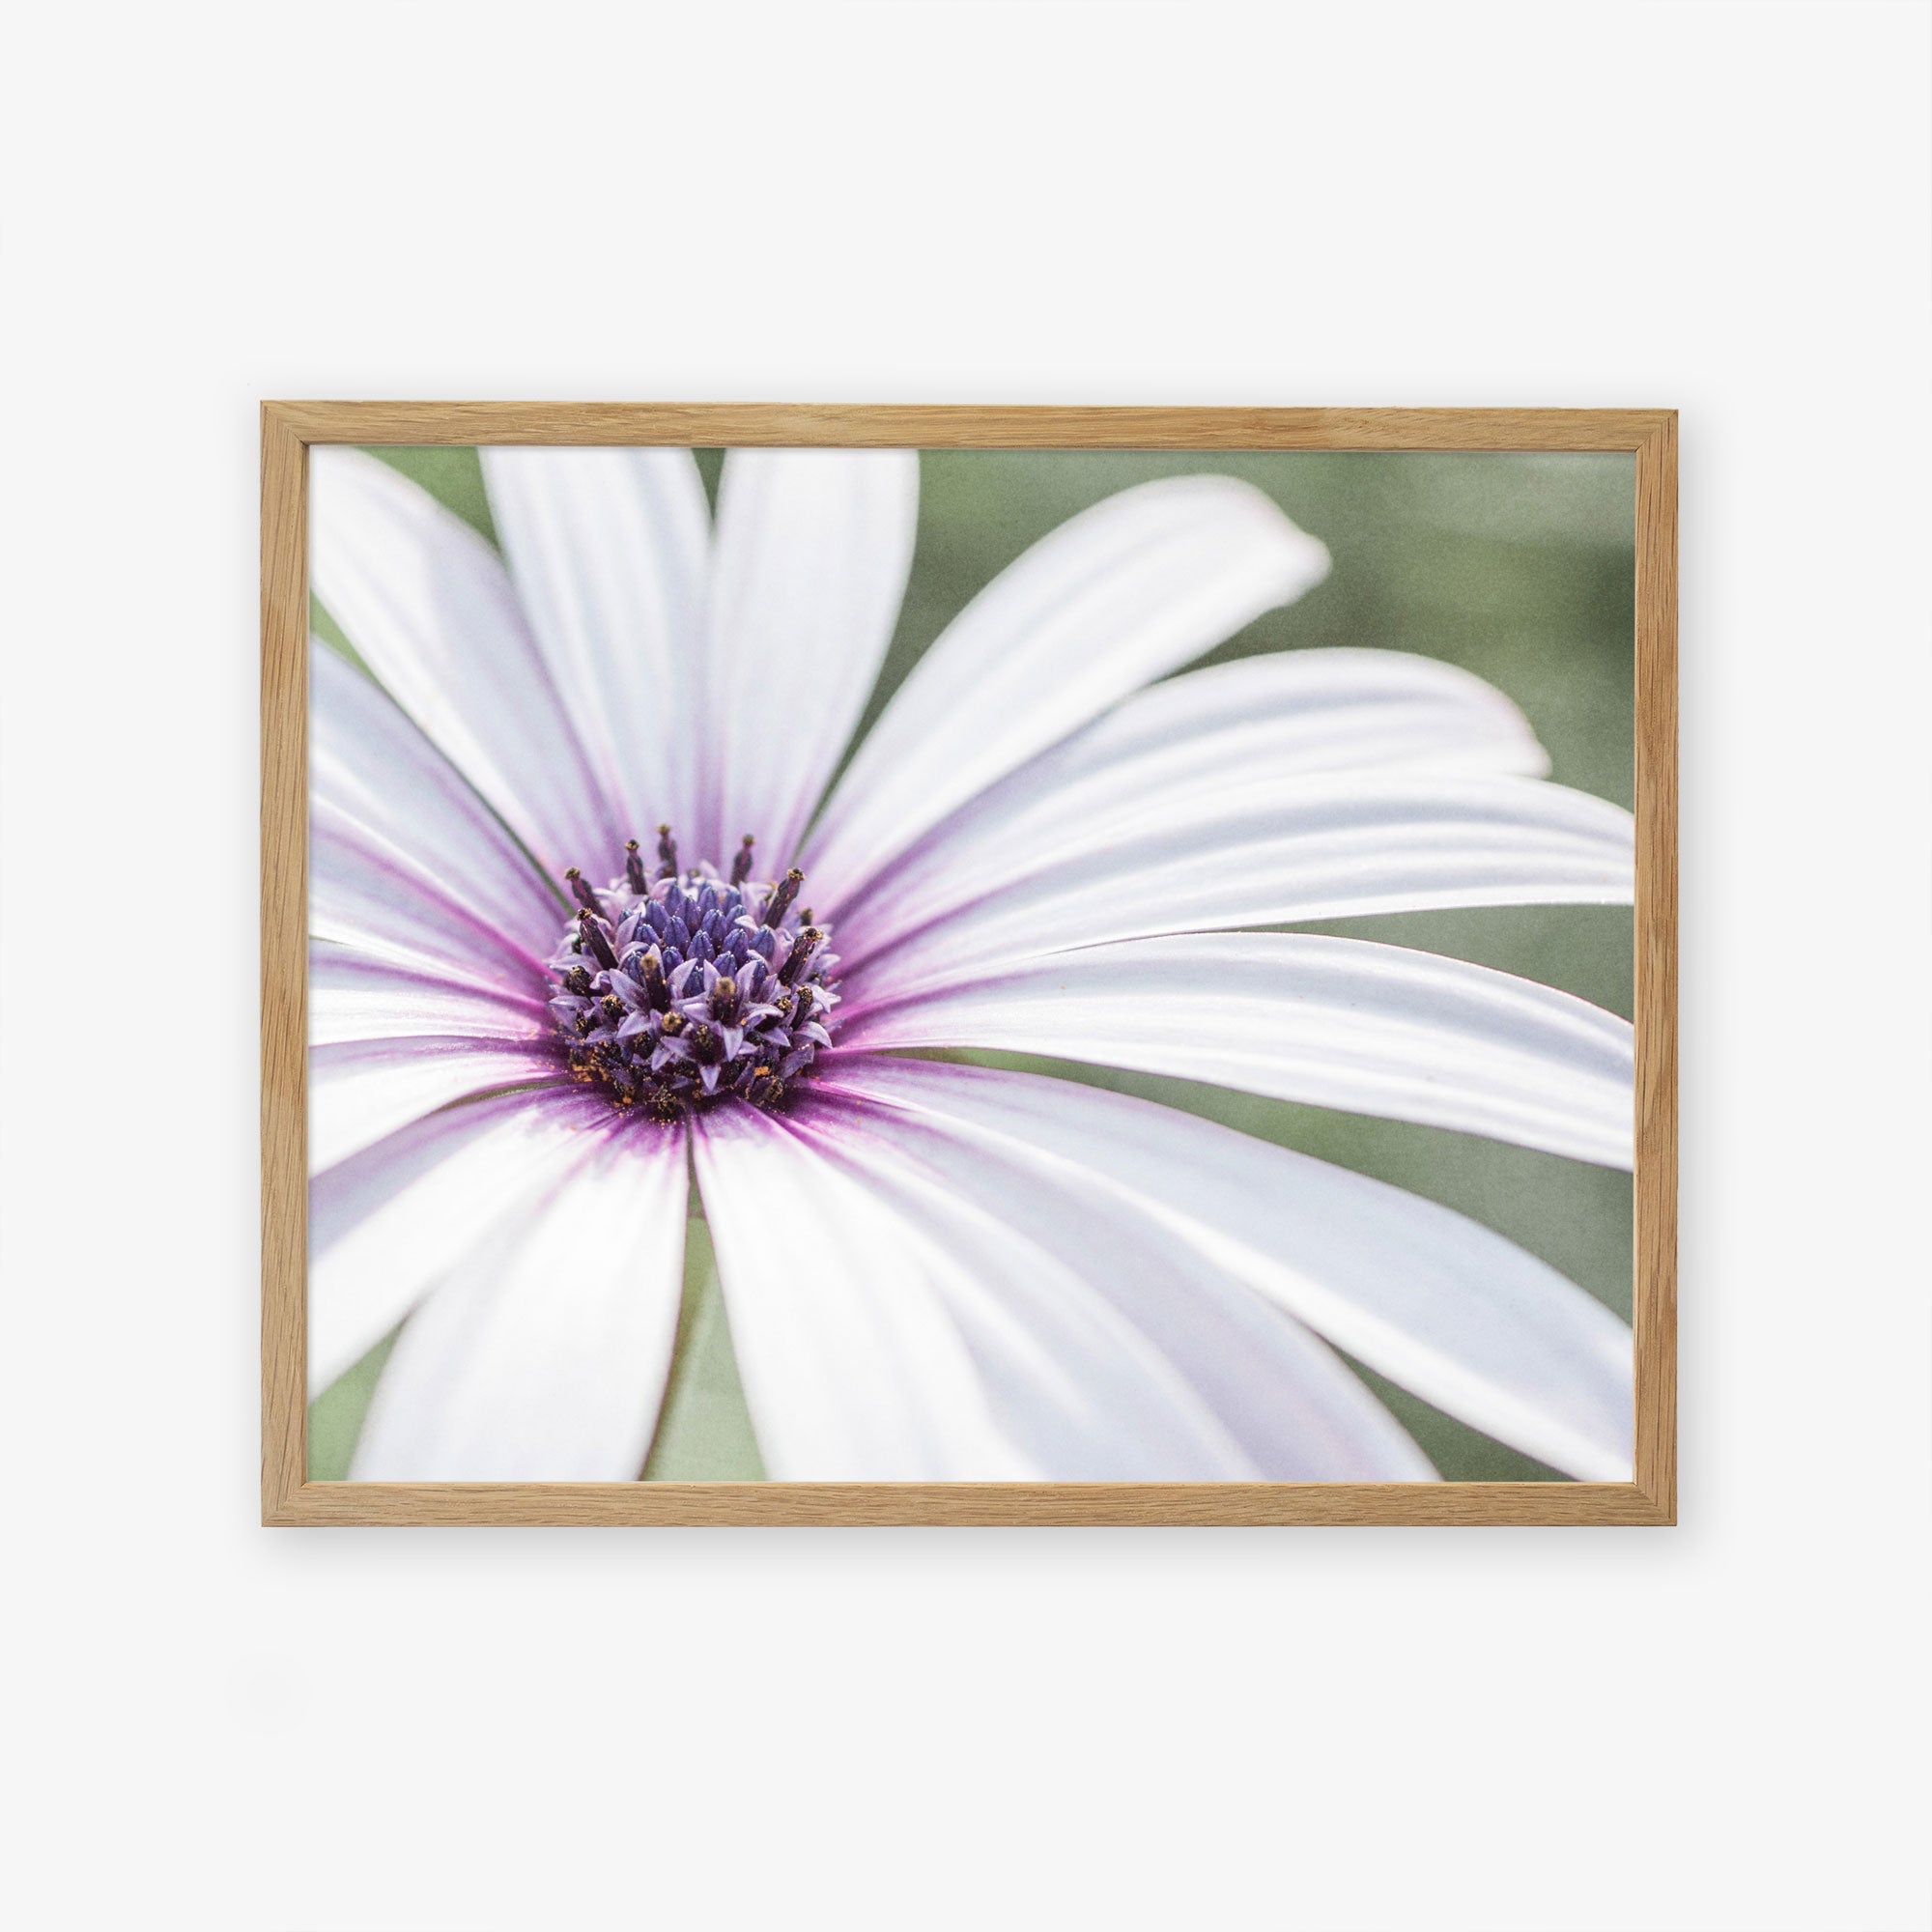 A close-up photo of a Large White Daisy Flower Print, &#39;Bed of Petals&#39;, vividly detailed, printed on archival photographic paper and displayed against a white background by Offley Green.